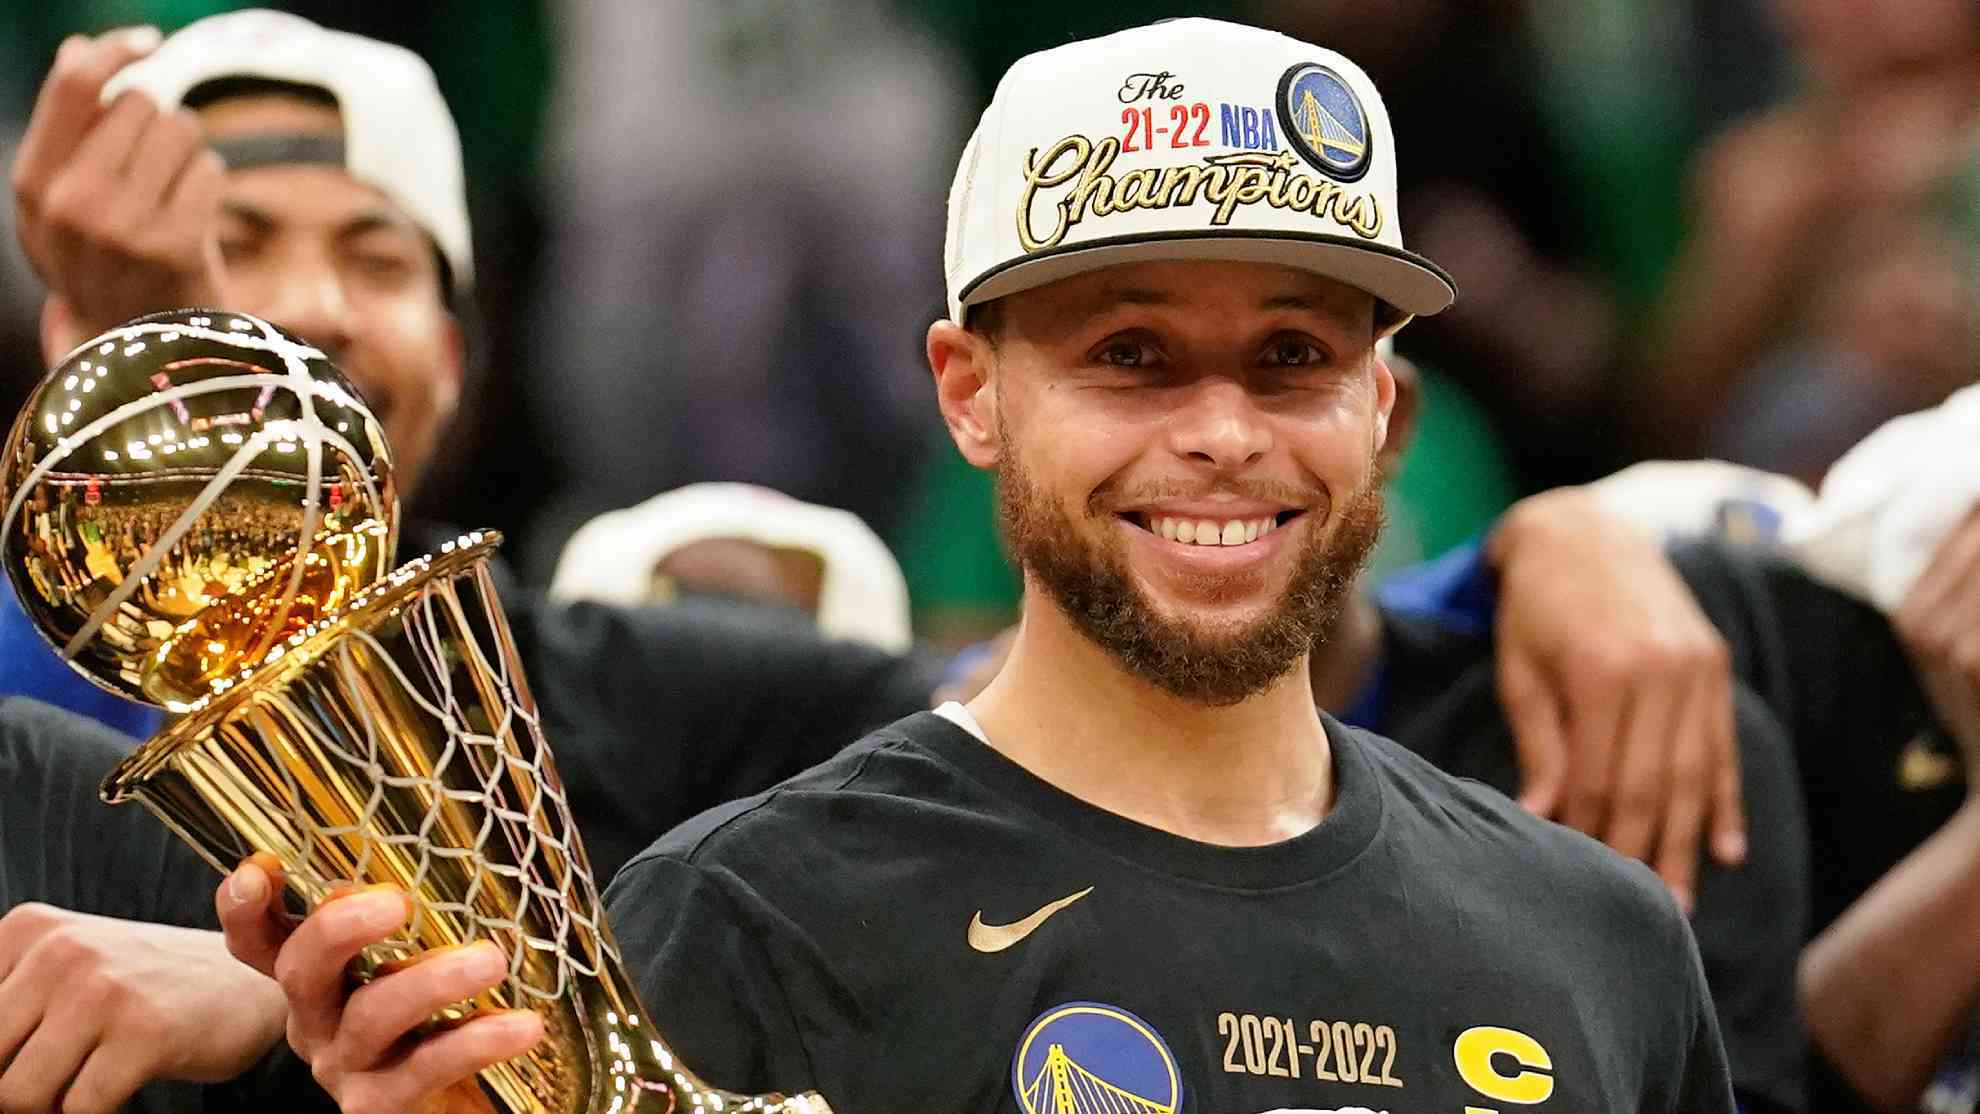 There's still no Finals MVP trophy for Stephen Curry, only a growing legacy